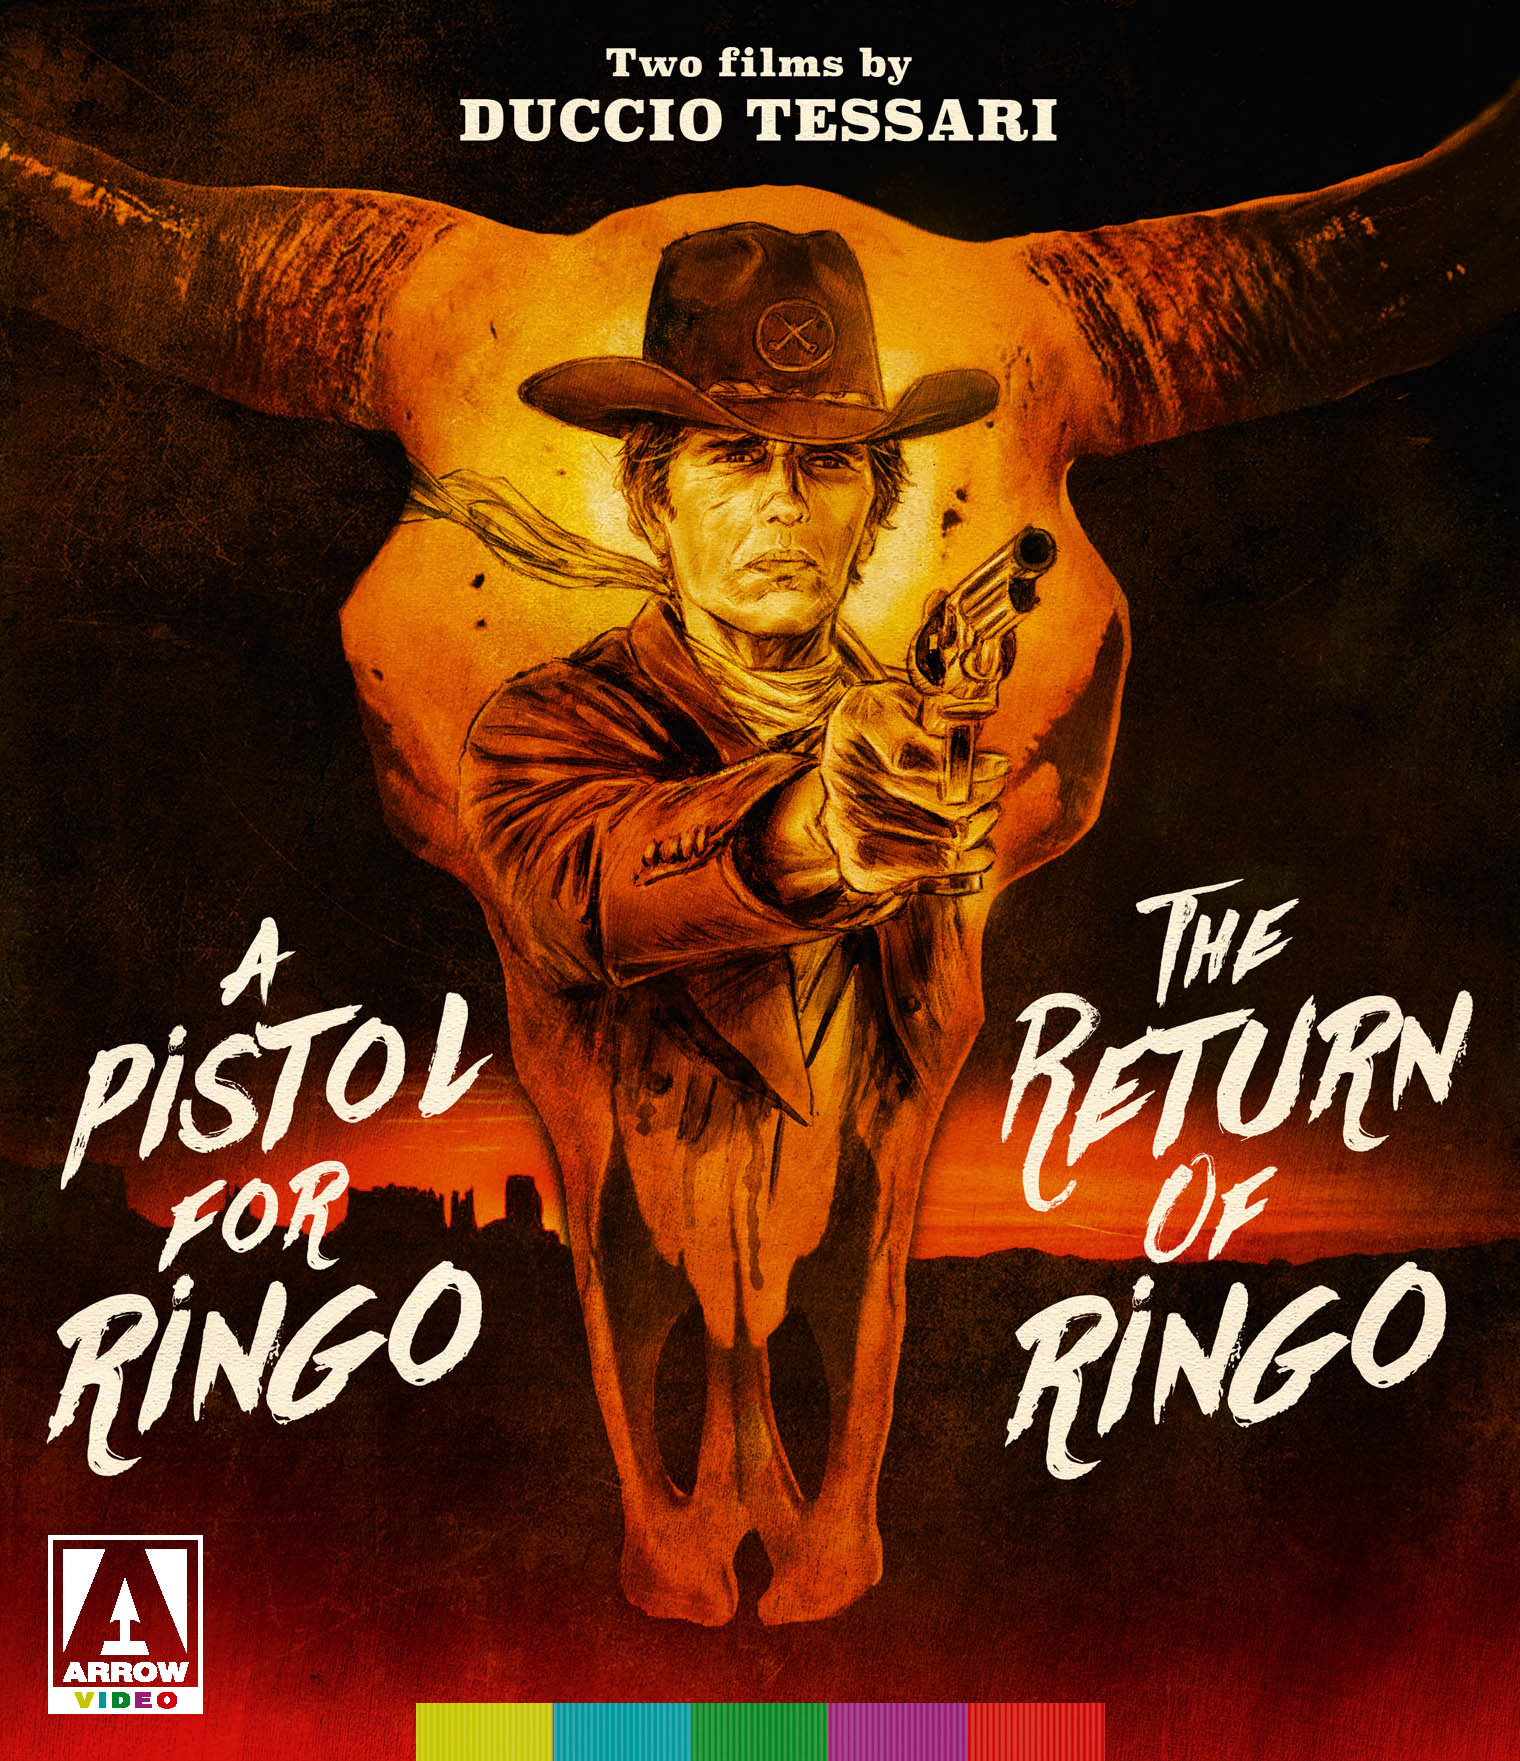 A Pistol For Ringo / The Return Of Blu-Ray Blu-Ray